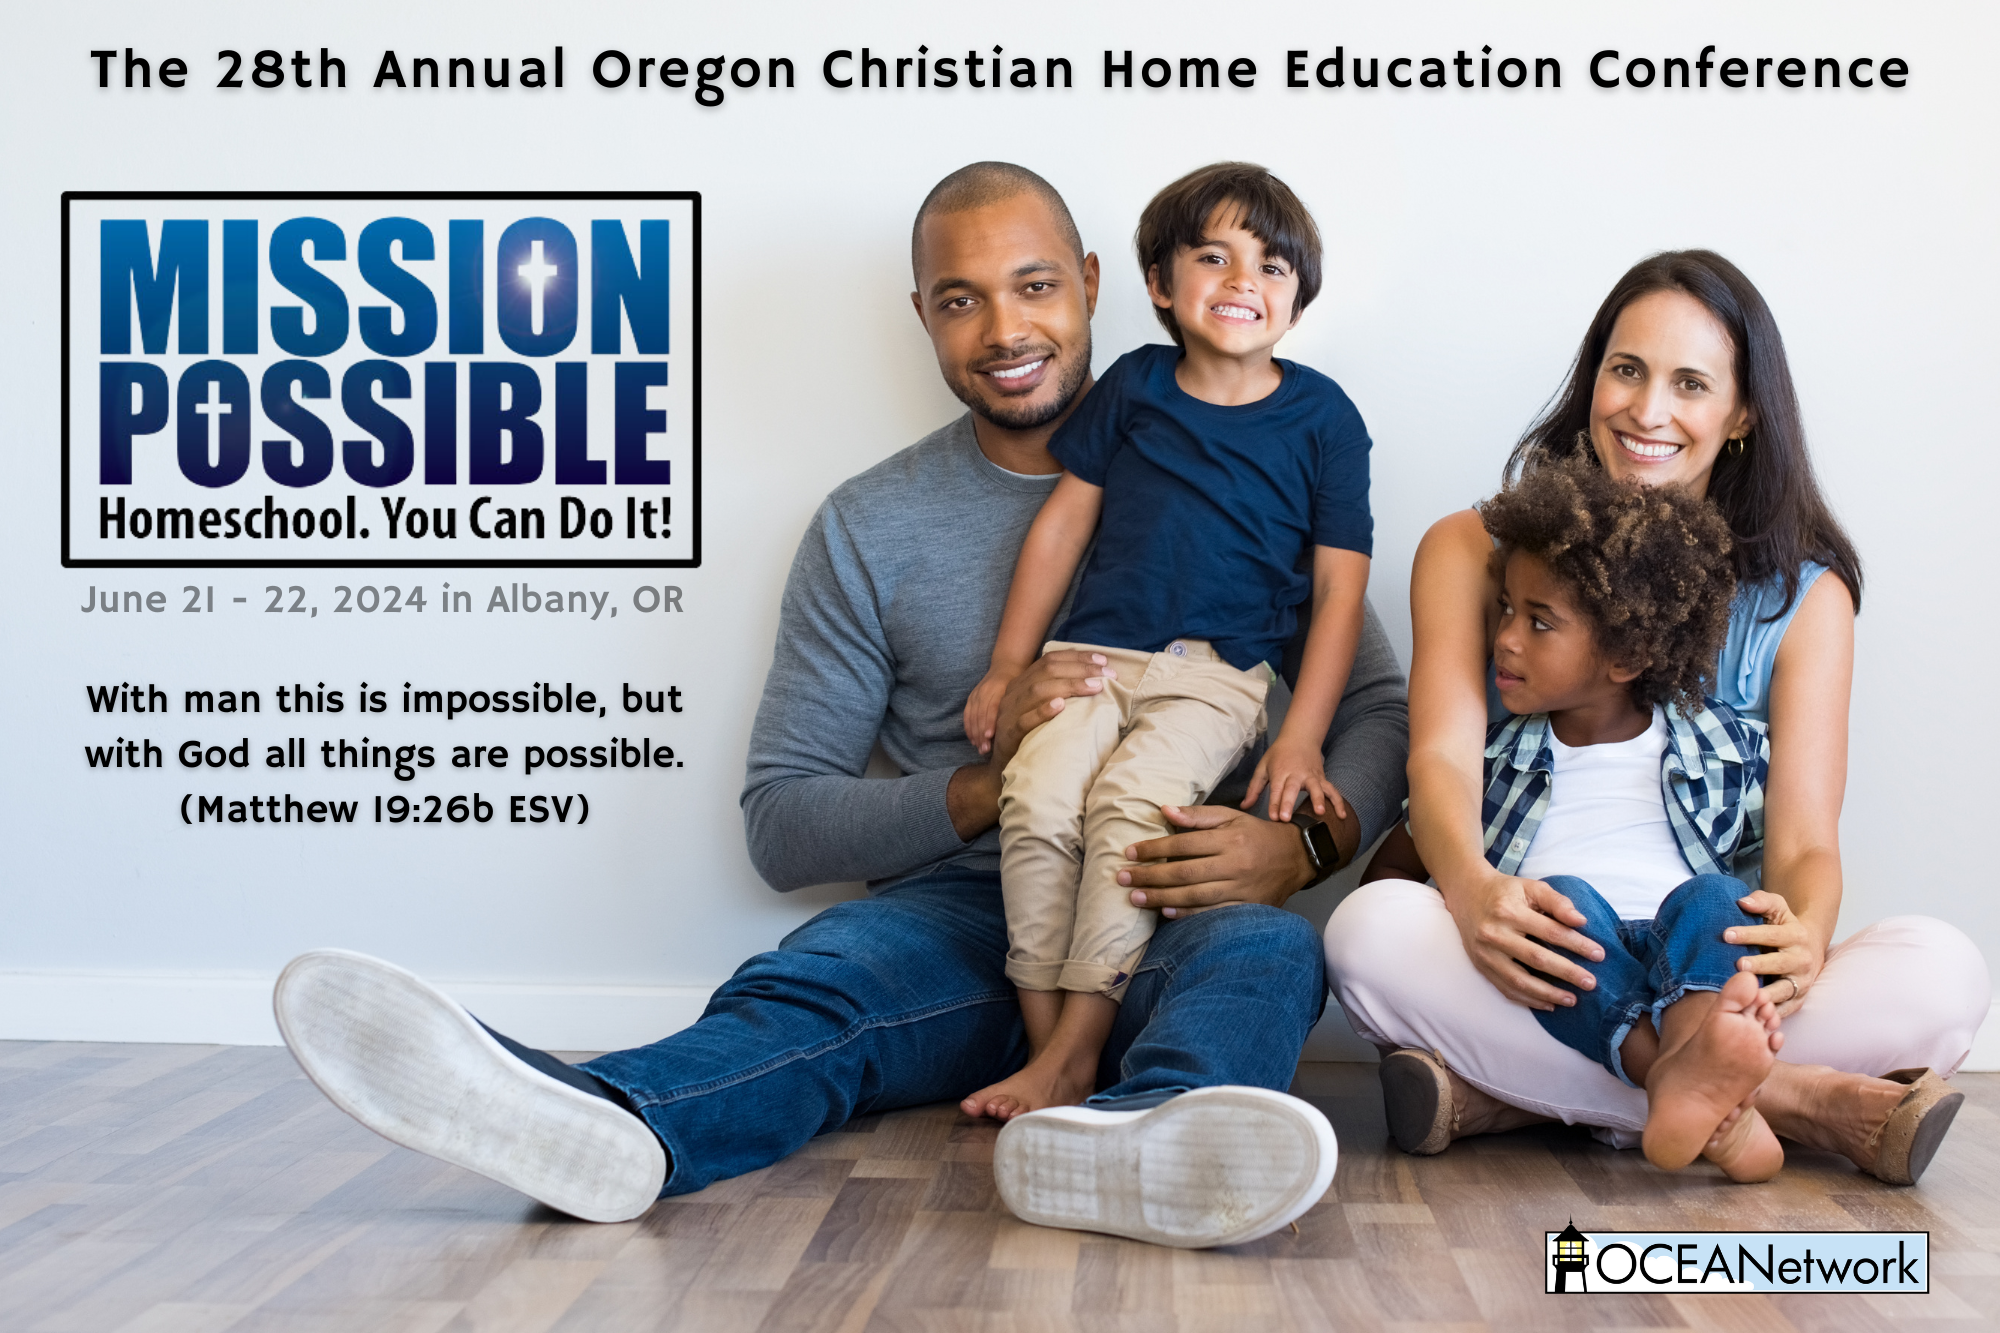 Oregon Christian Home Education Conference